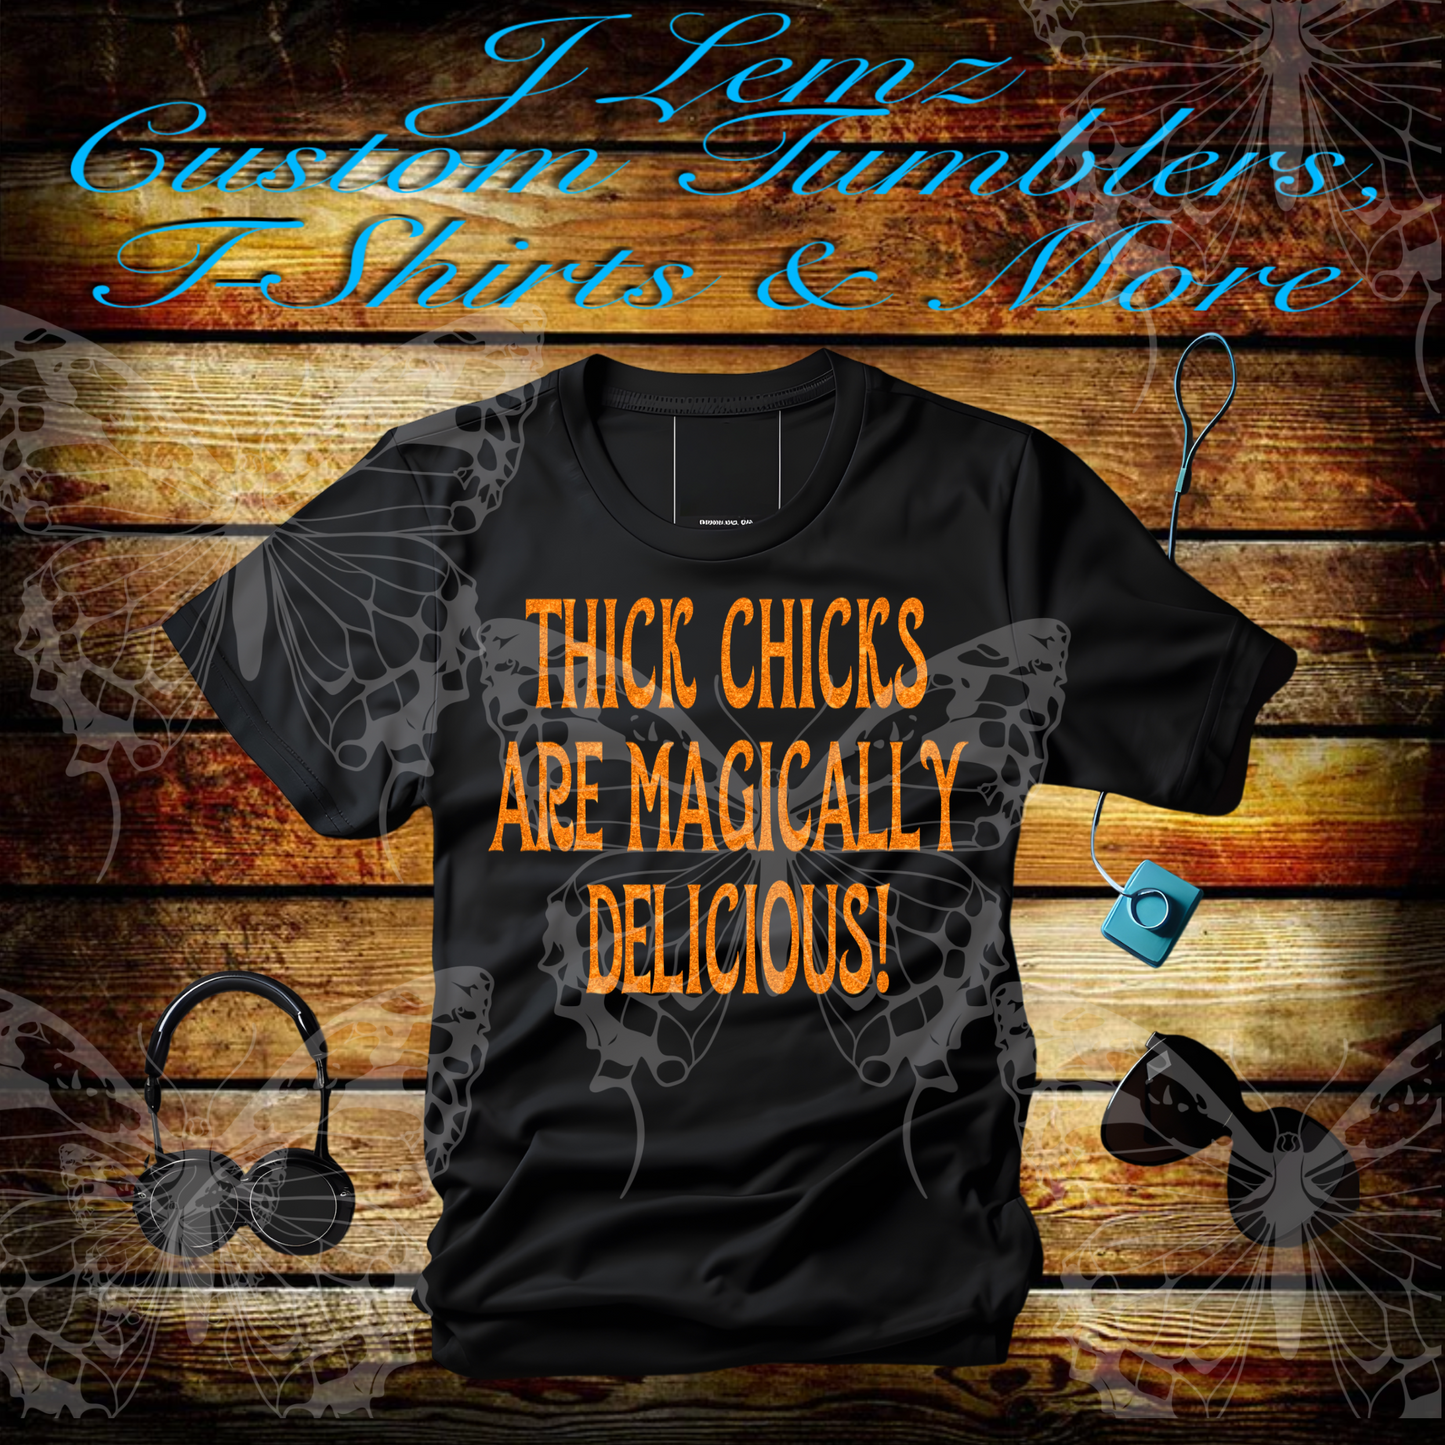 Thick Chicks are magically Delicious